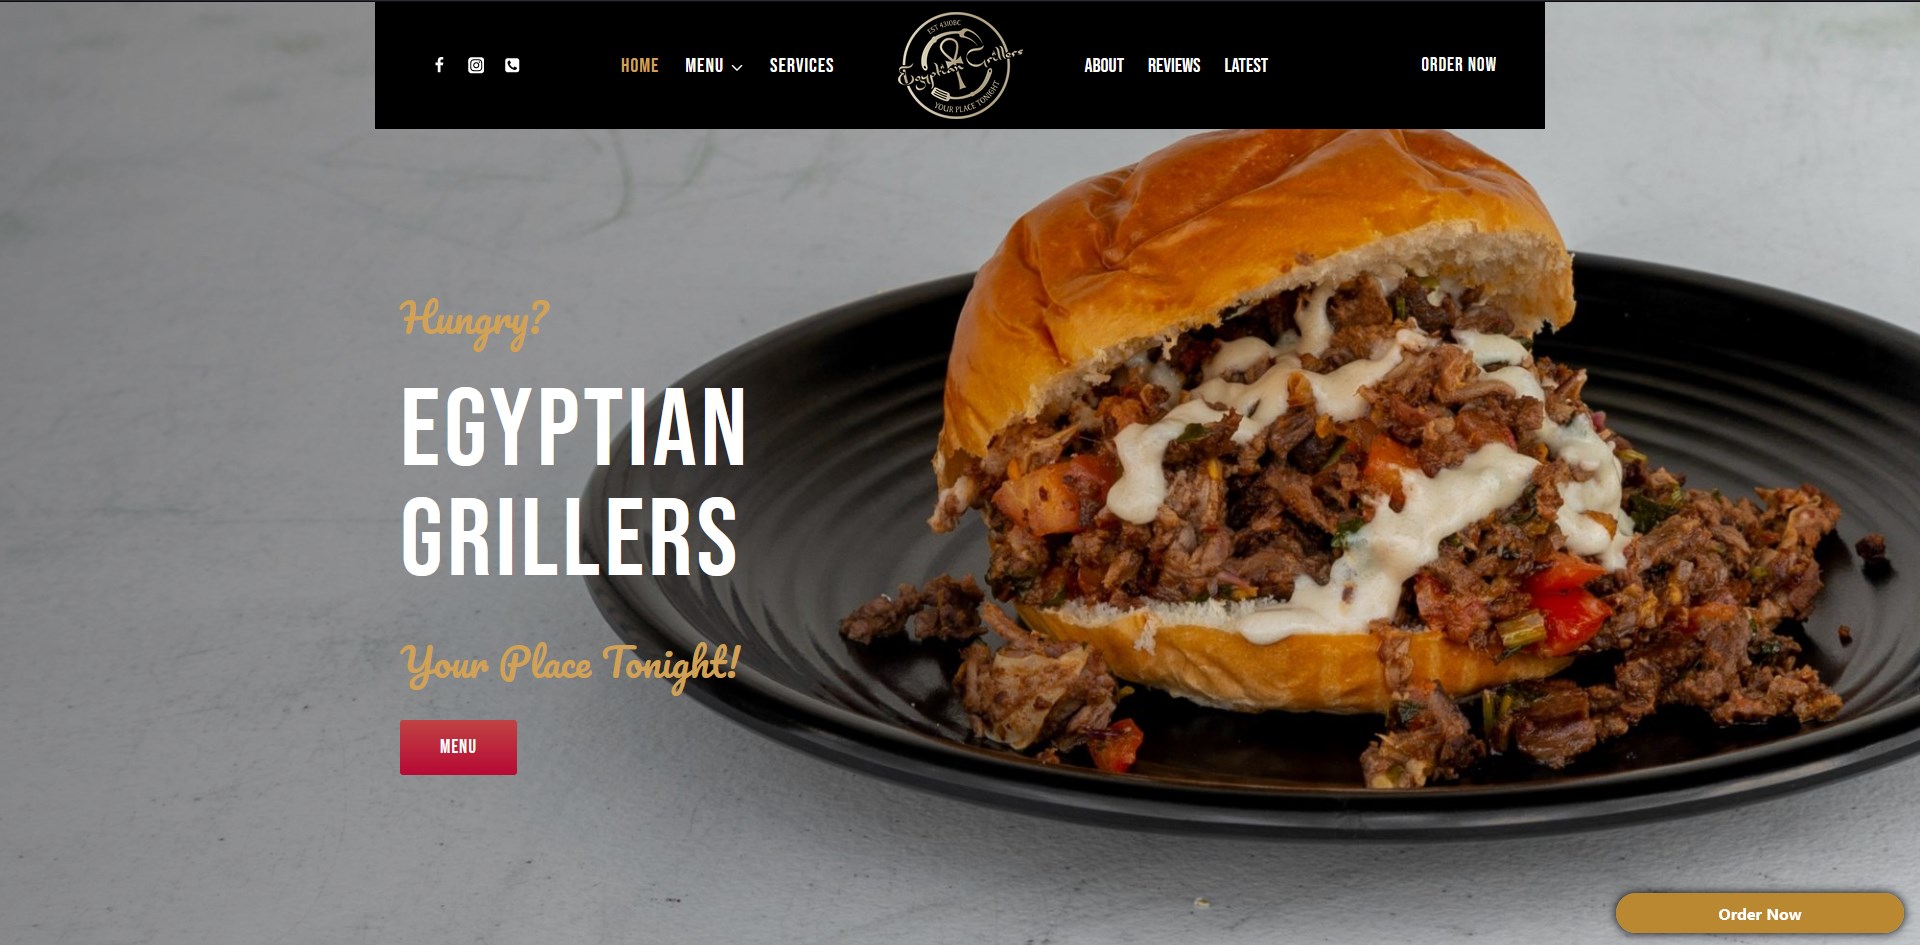 Egyptian Grillers is a group of 5 passionate cooks on a mission to bring Egyptian street food to the masses.